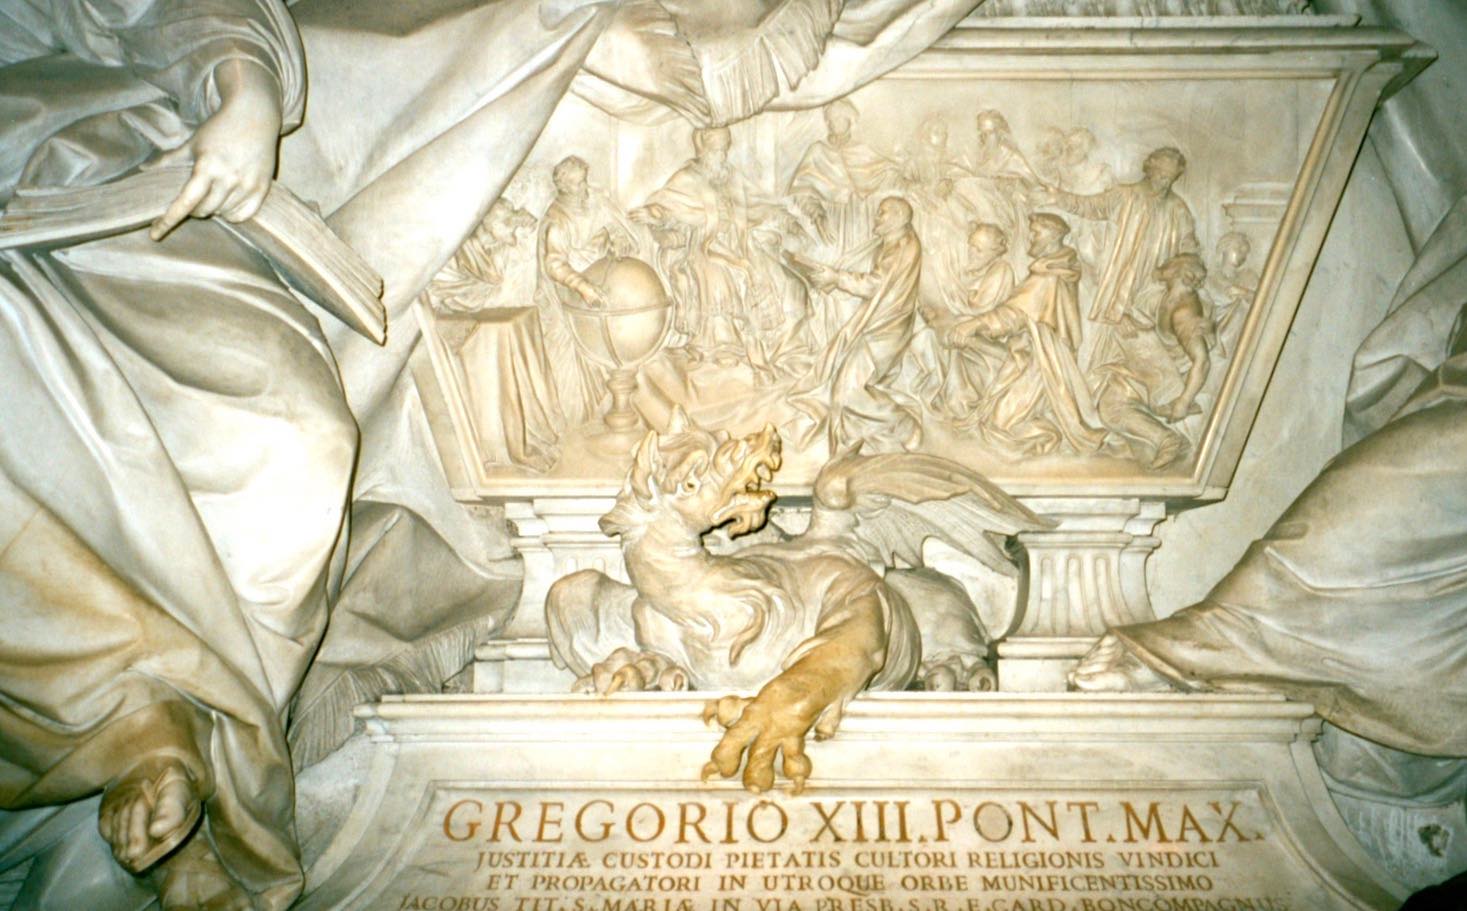 The tomb of Pope Gregory XIII in the Vatican